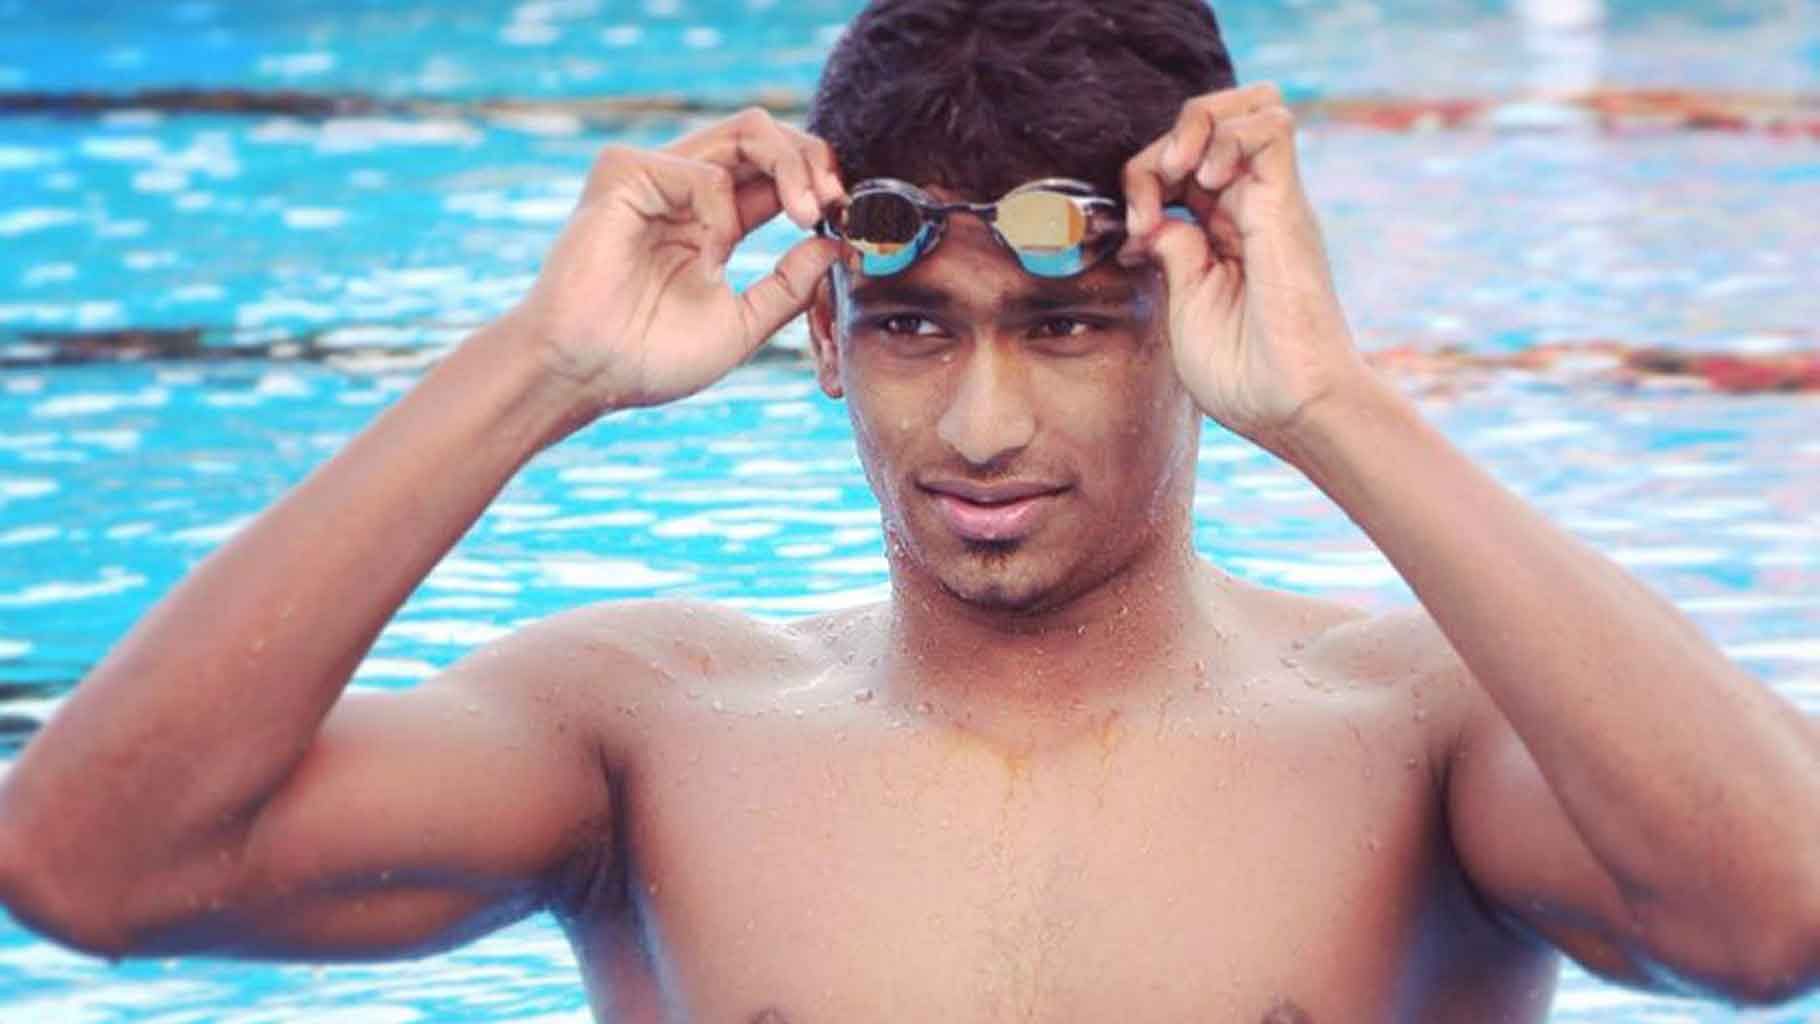 Sajan Prakash has become the first Indian swimmer to win an automatic berth for the Tokyo Olympic Games in the men’s 200 metres butterfly event.